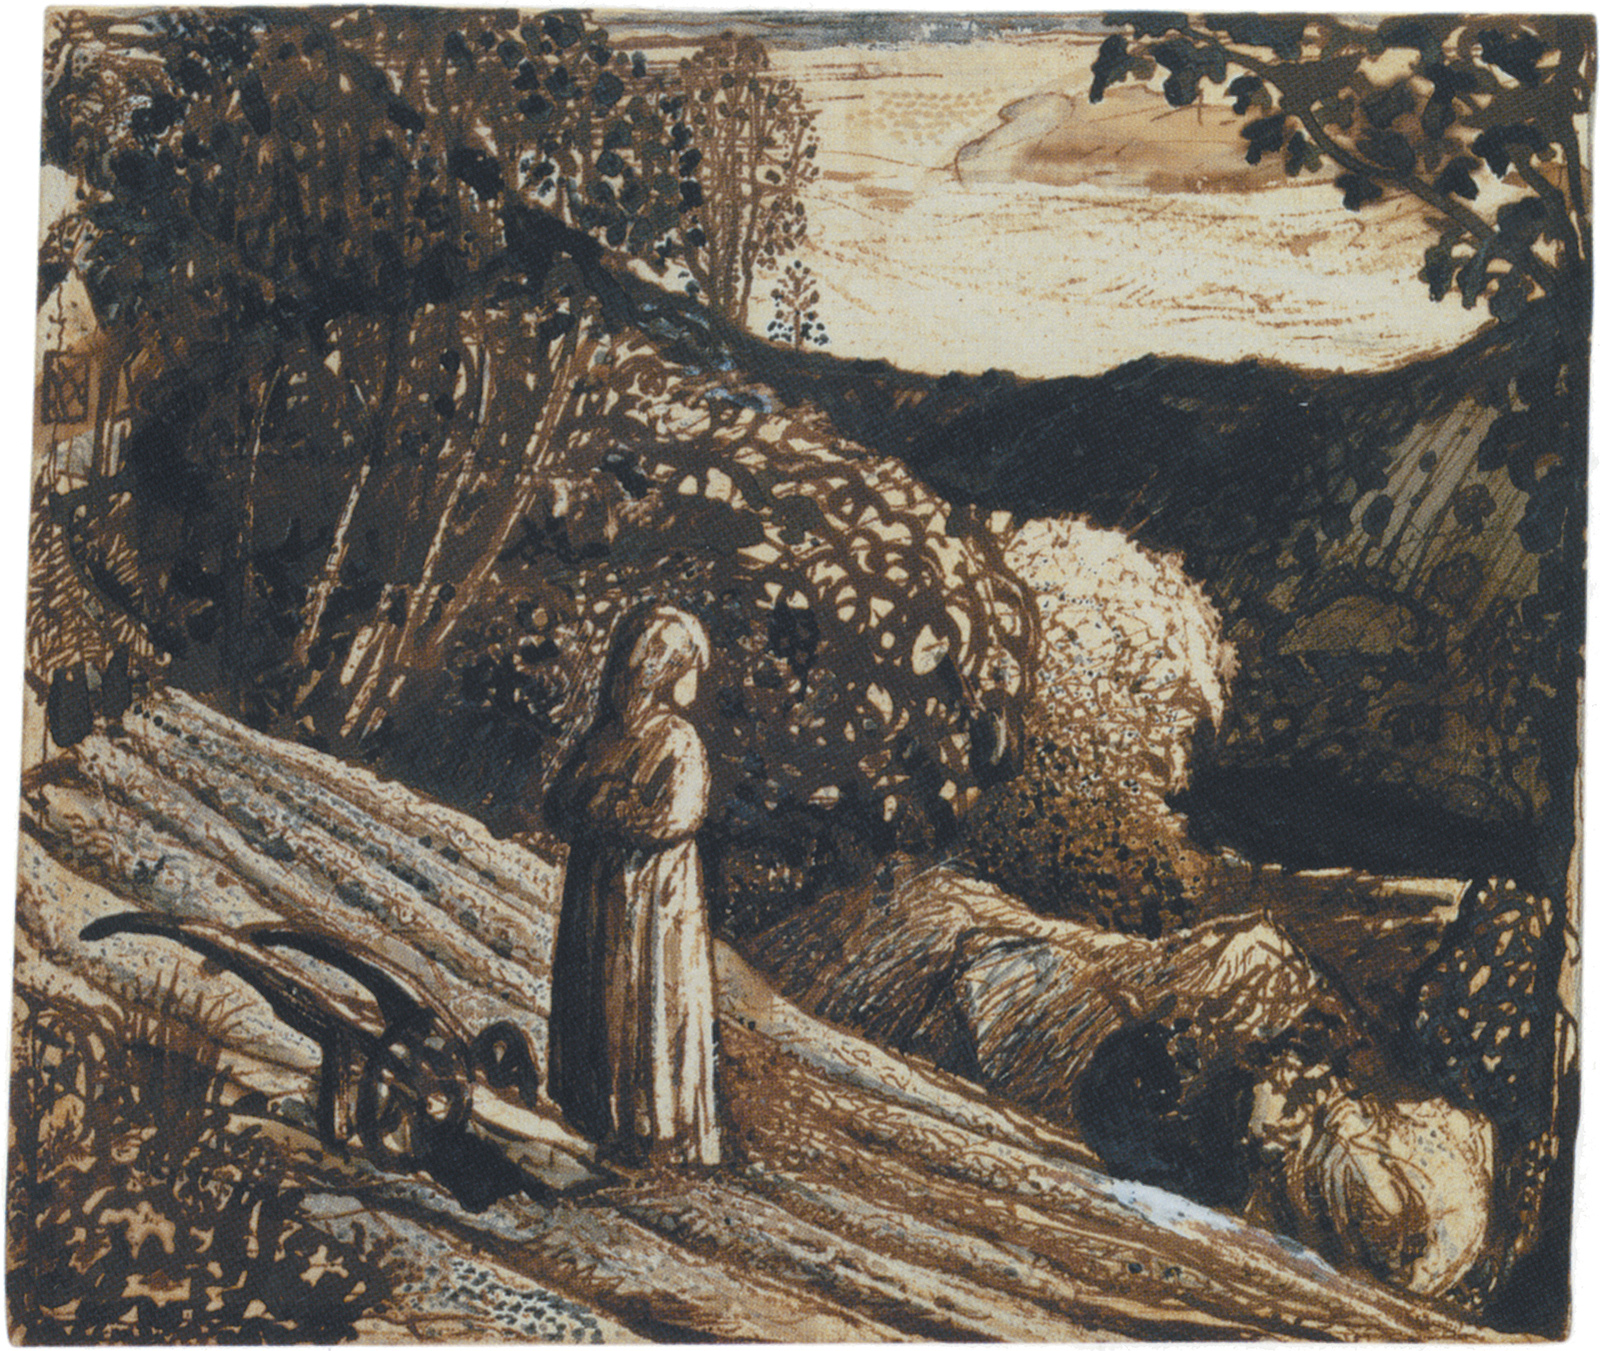 Samuel Palmer: Girl Standing, circa 1826; from William Vaughan’s book Samuel Palmer: Shadows on the Wall, just published by Yale University Press